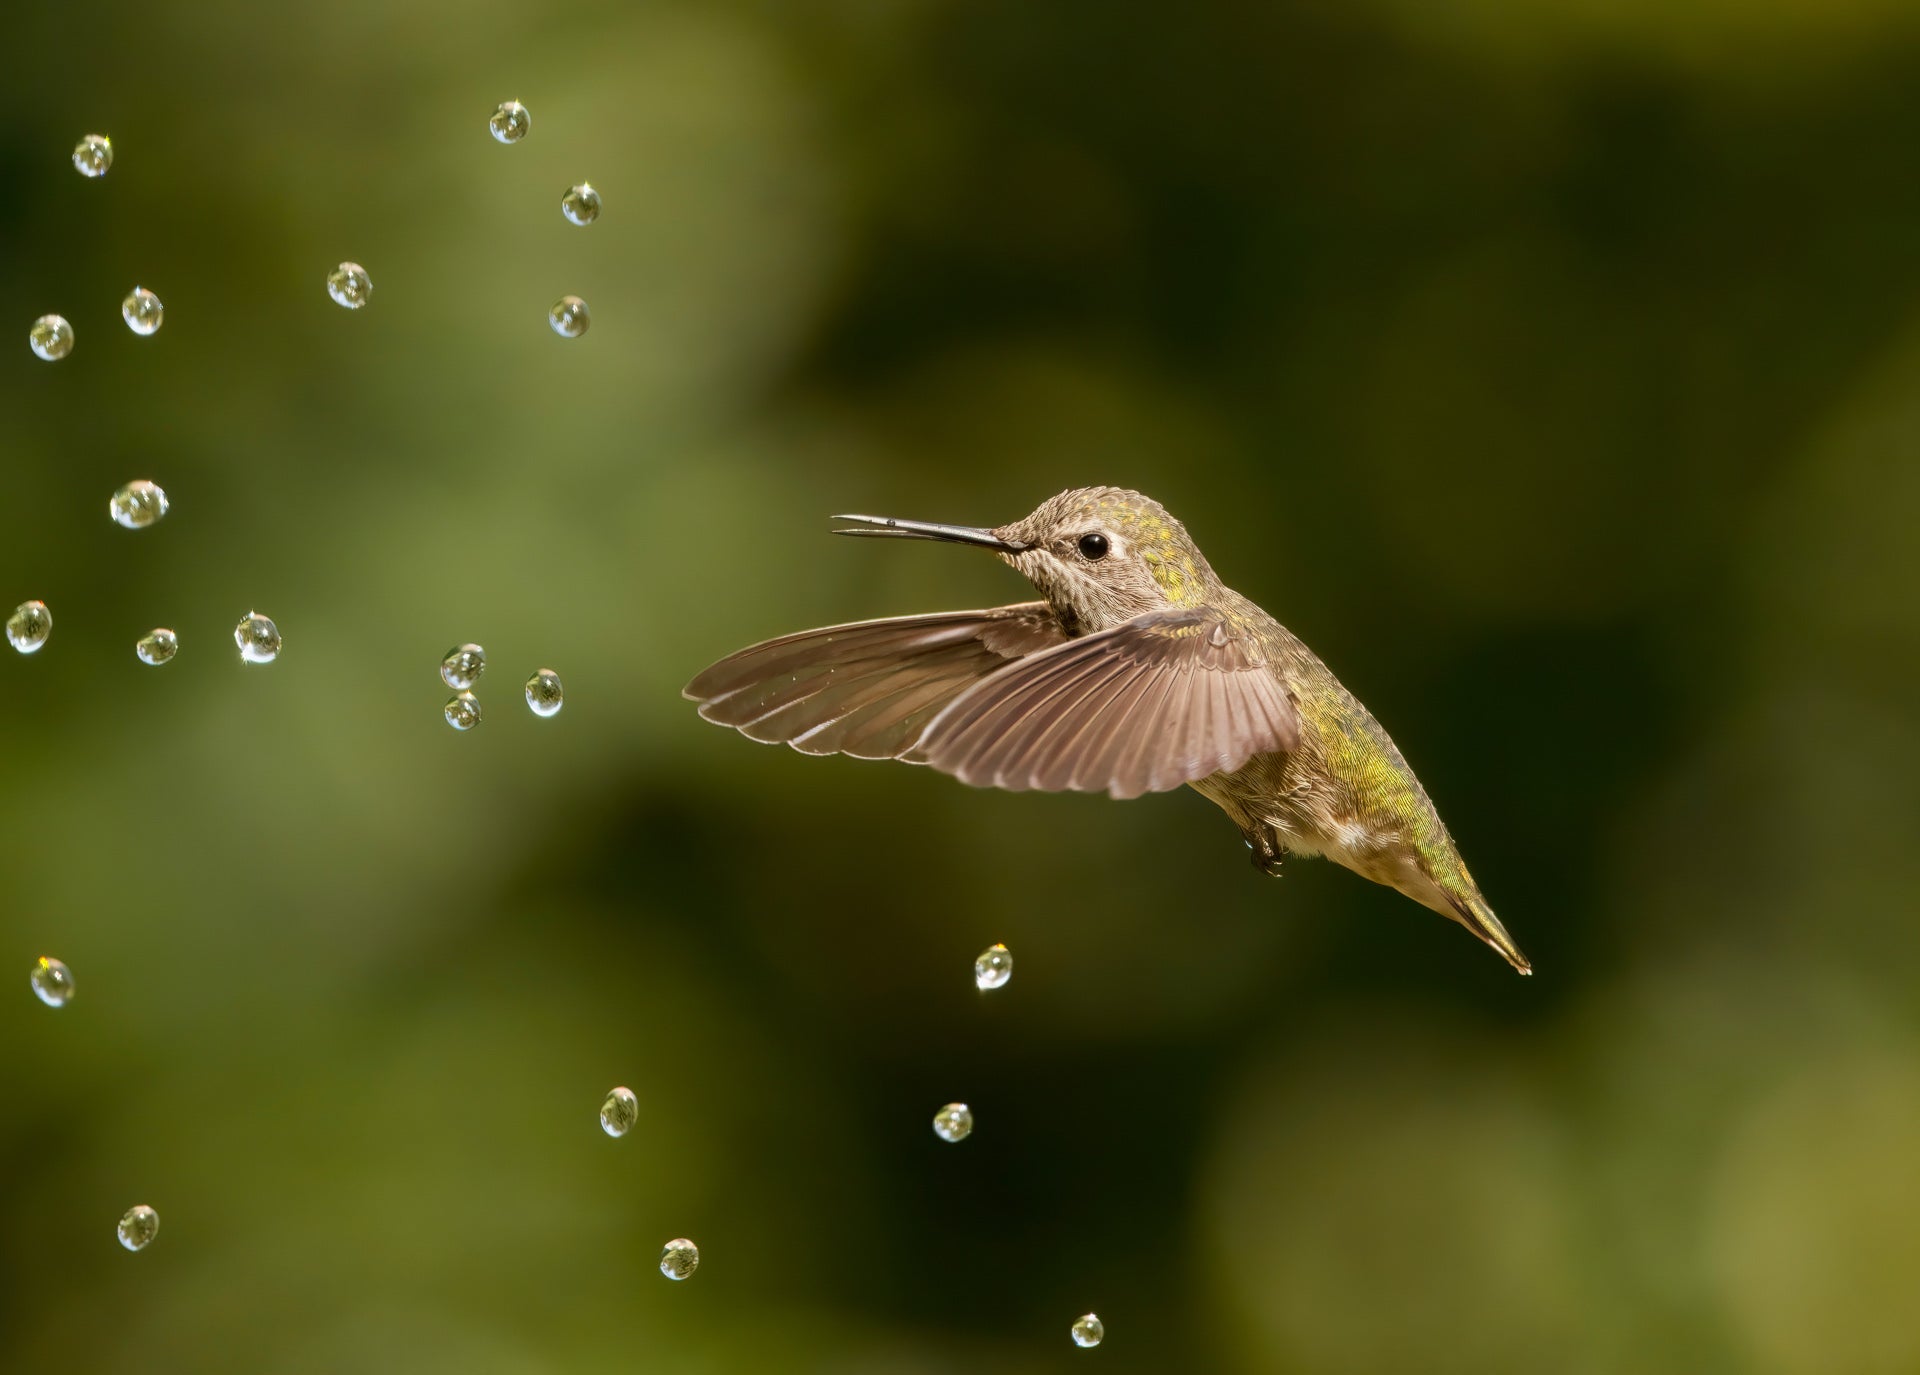 An Anna's hummingbird is curious about these water droplets. (Photo: Parham Pourahmad)